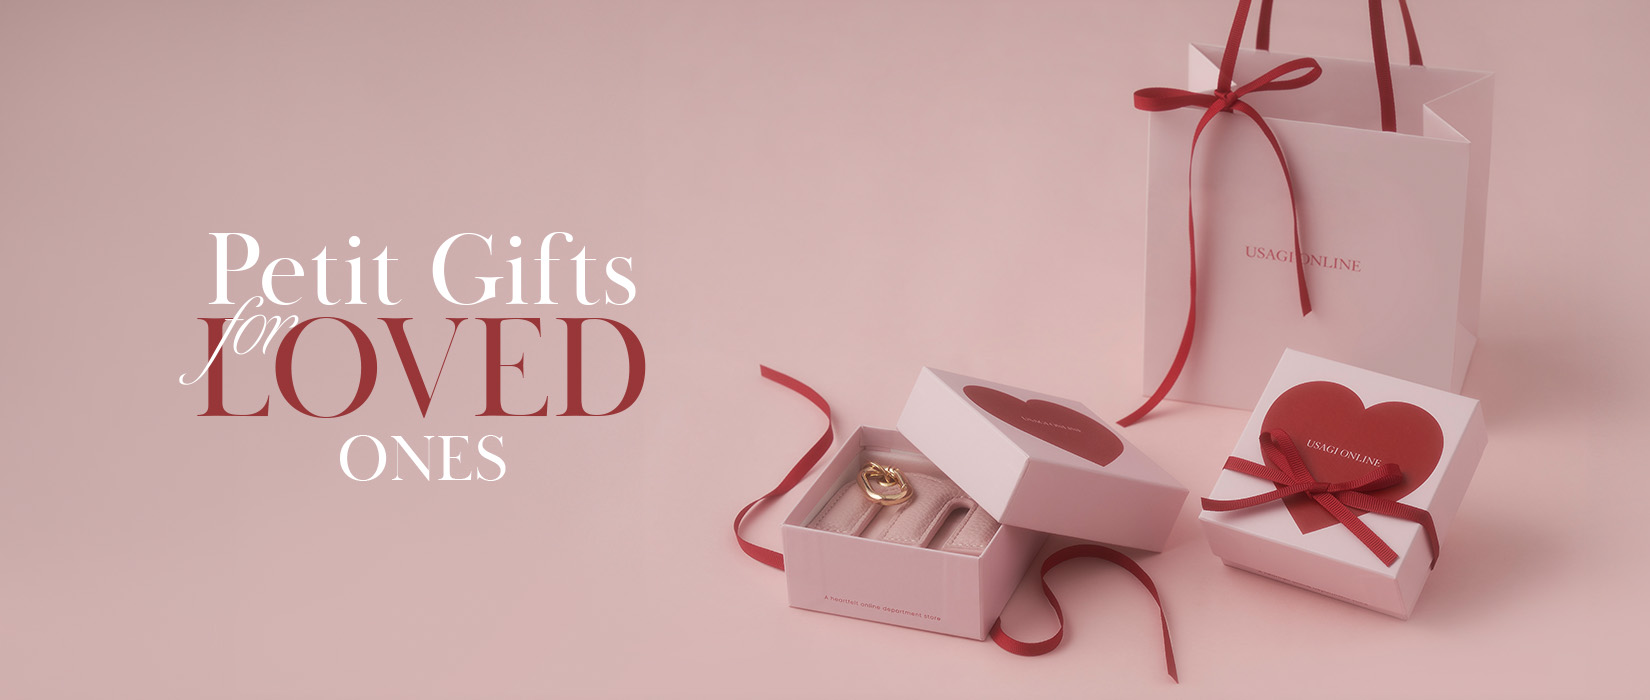 Petit Gifts for loved ones